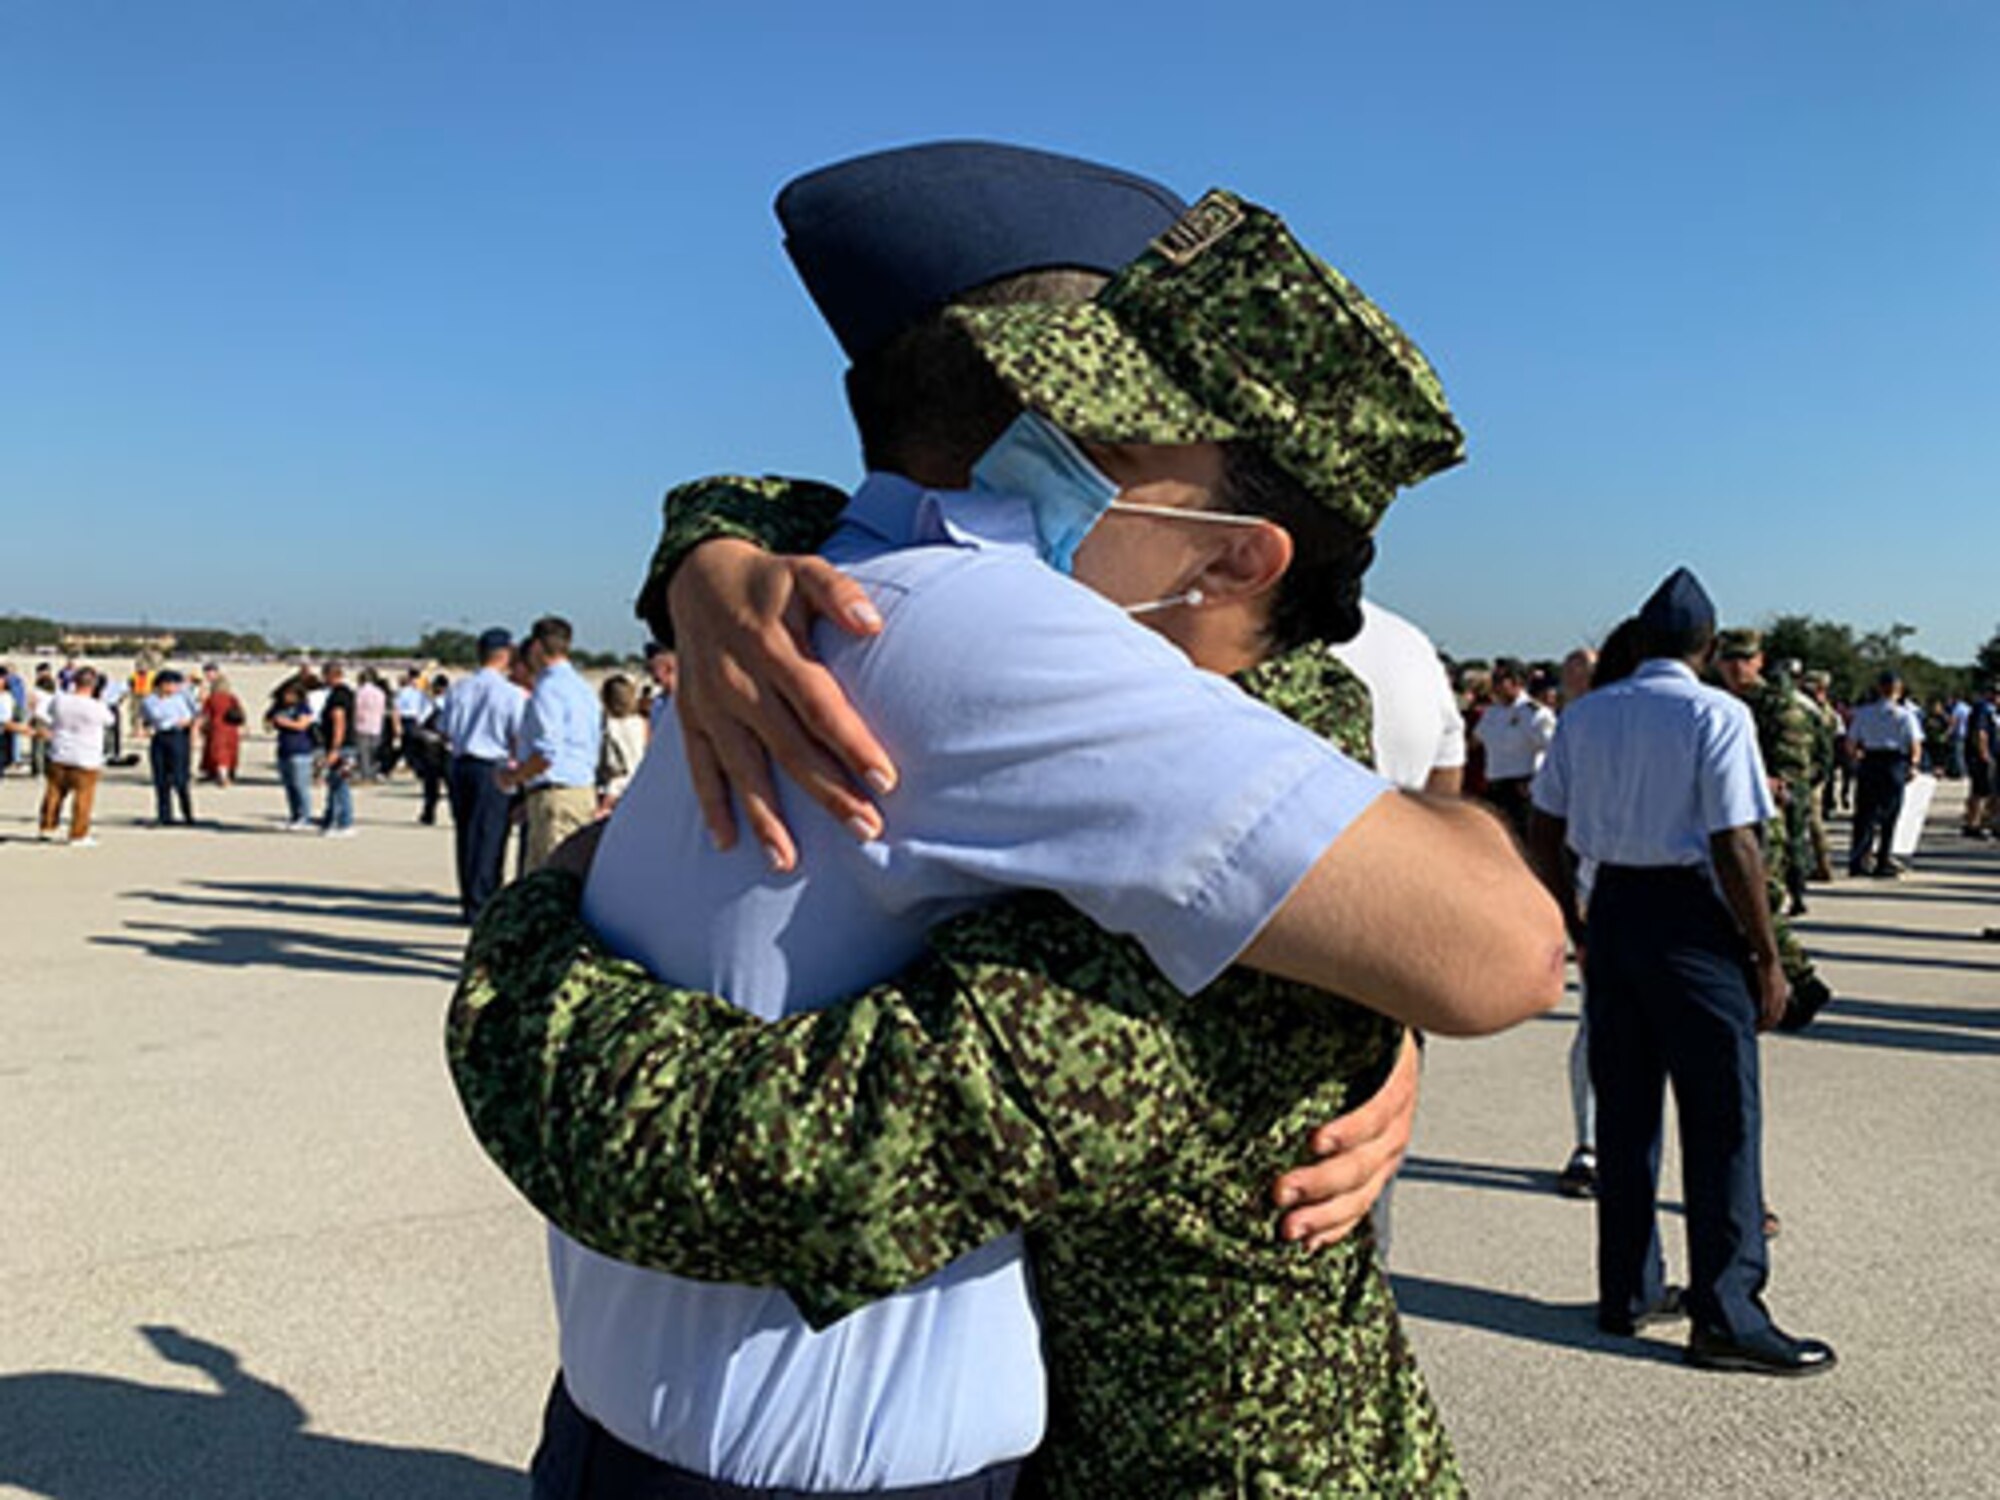 Colombian Navy officer hugs Airman after BMT graduation.